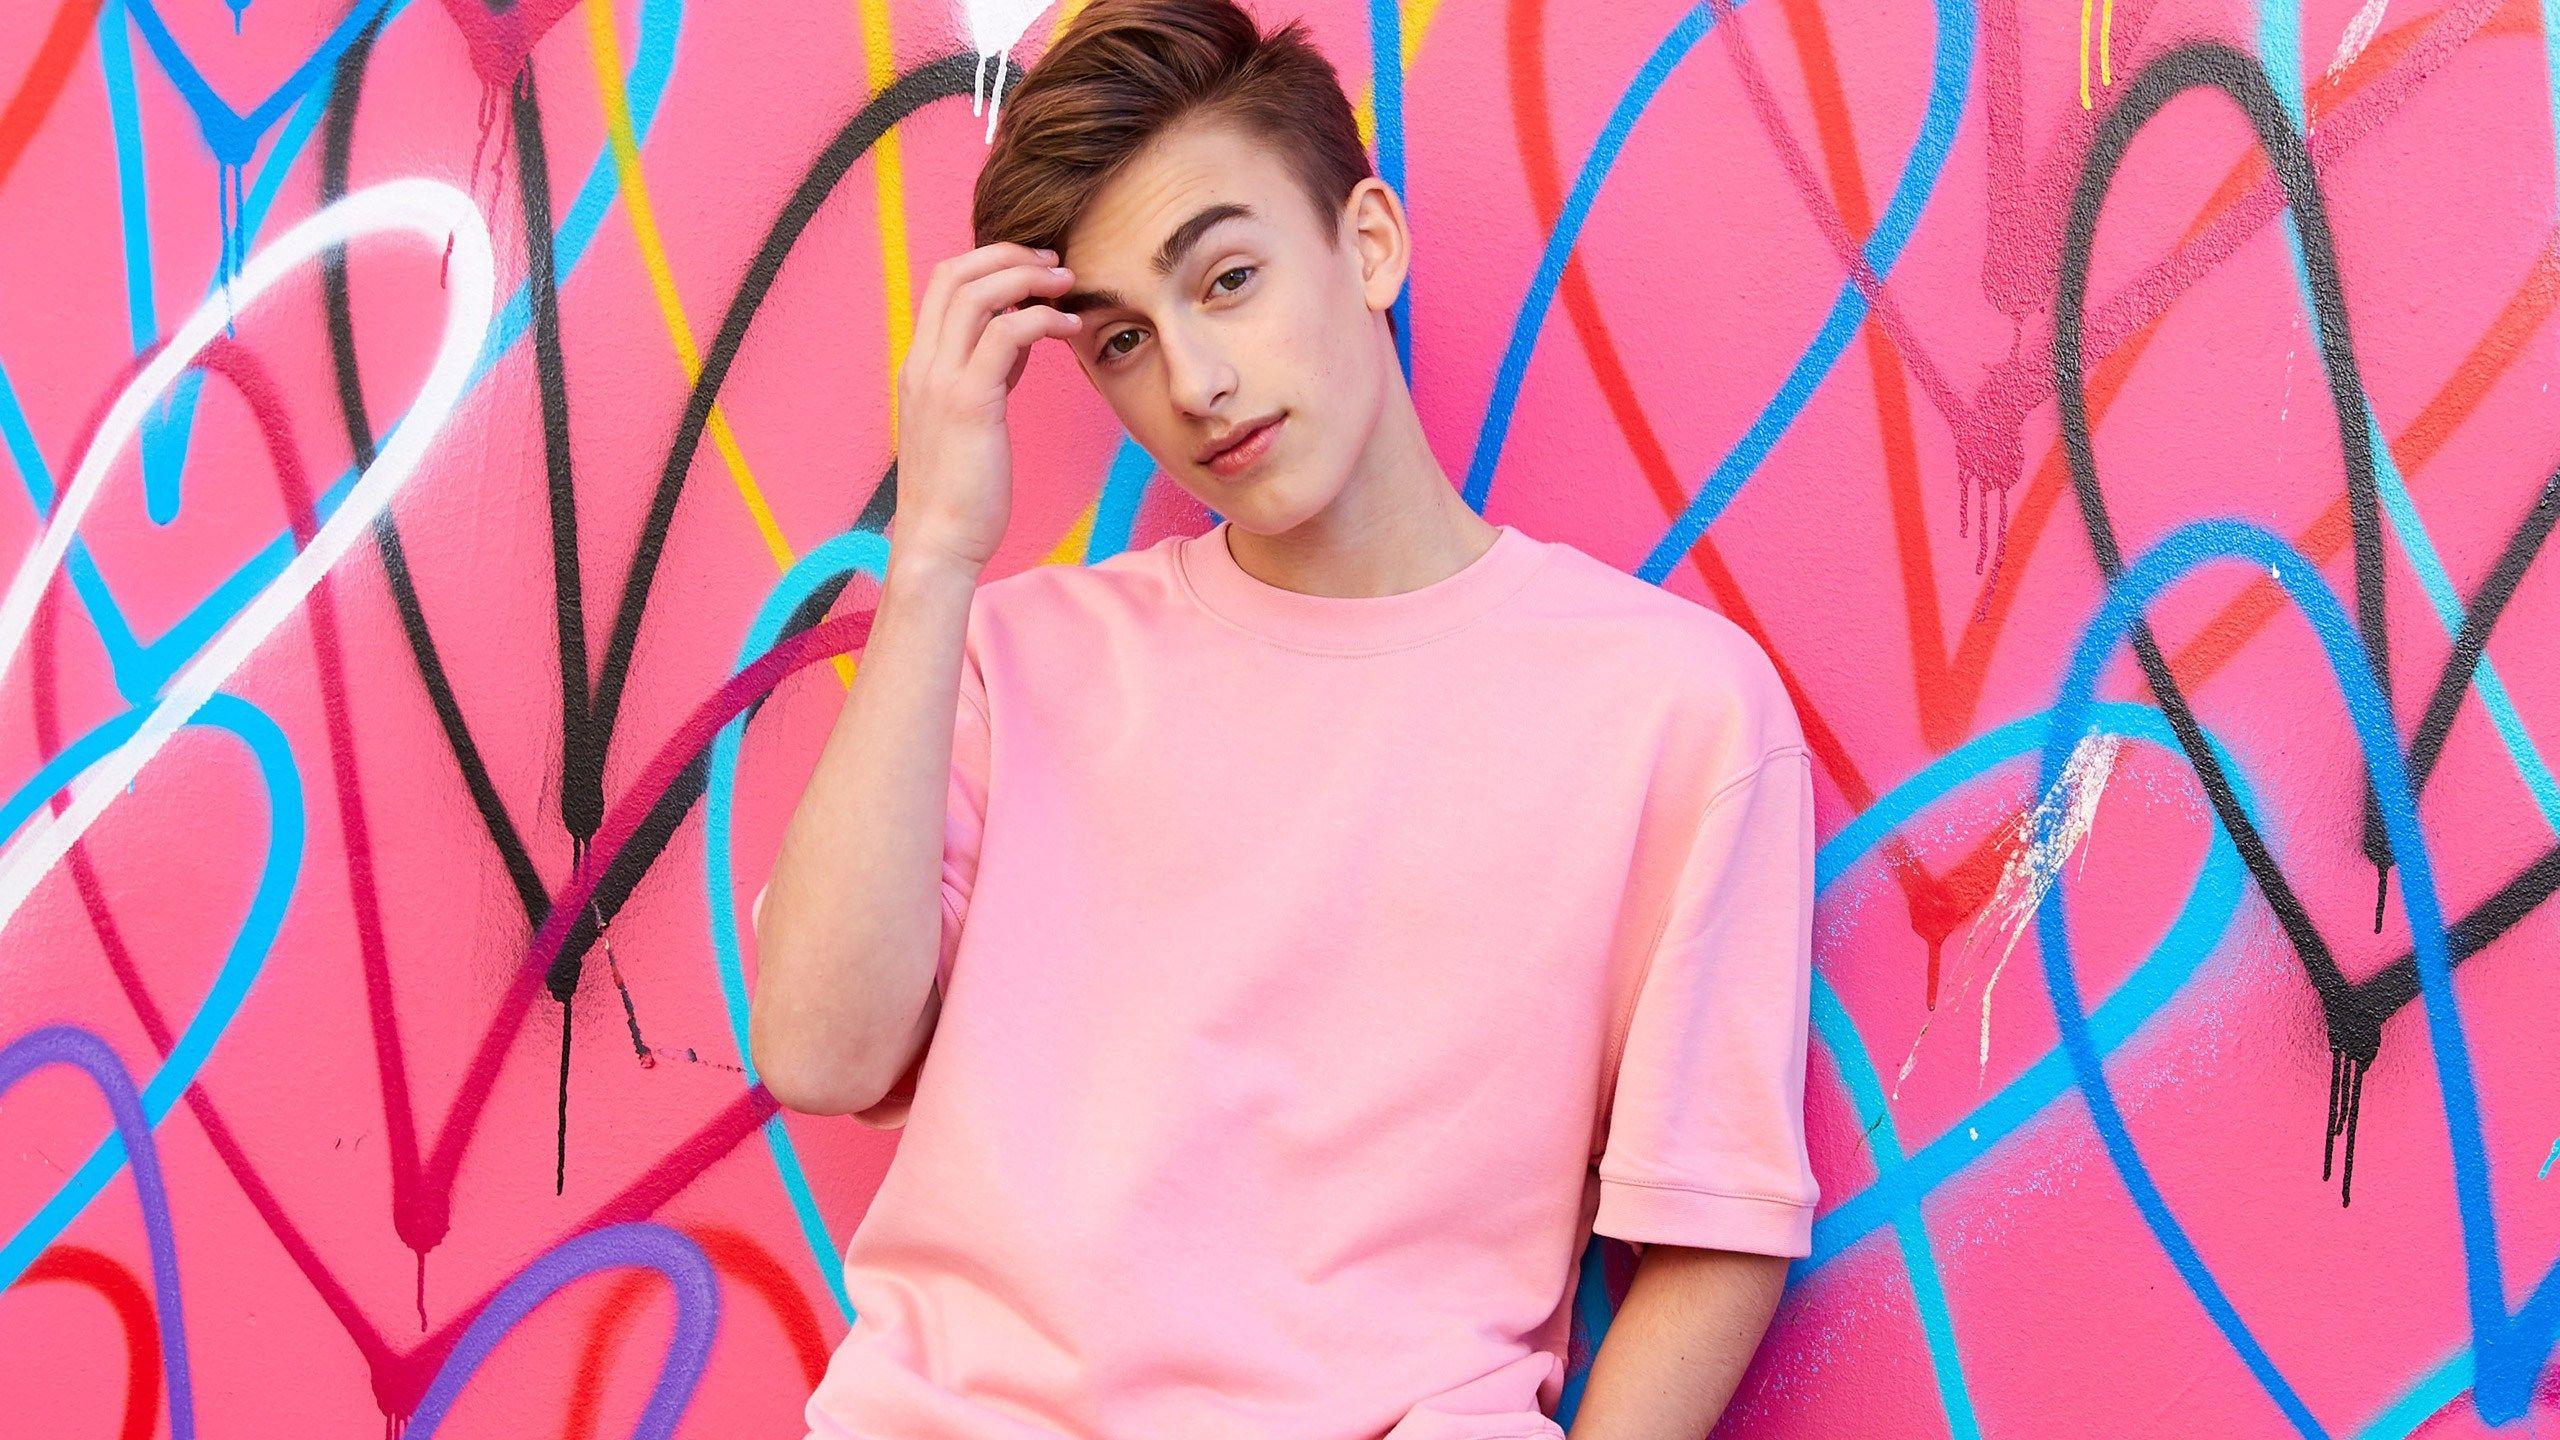 Johnny Orlando Wallpapers - Top Free Johnny Orlando Backgrounds